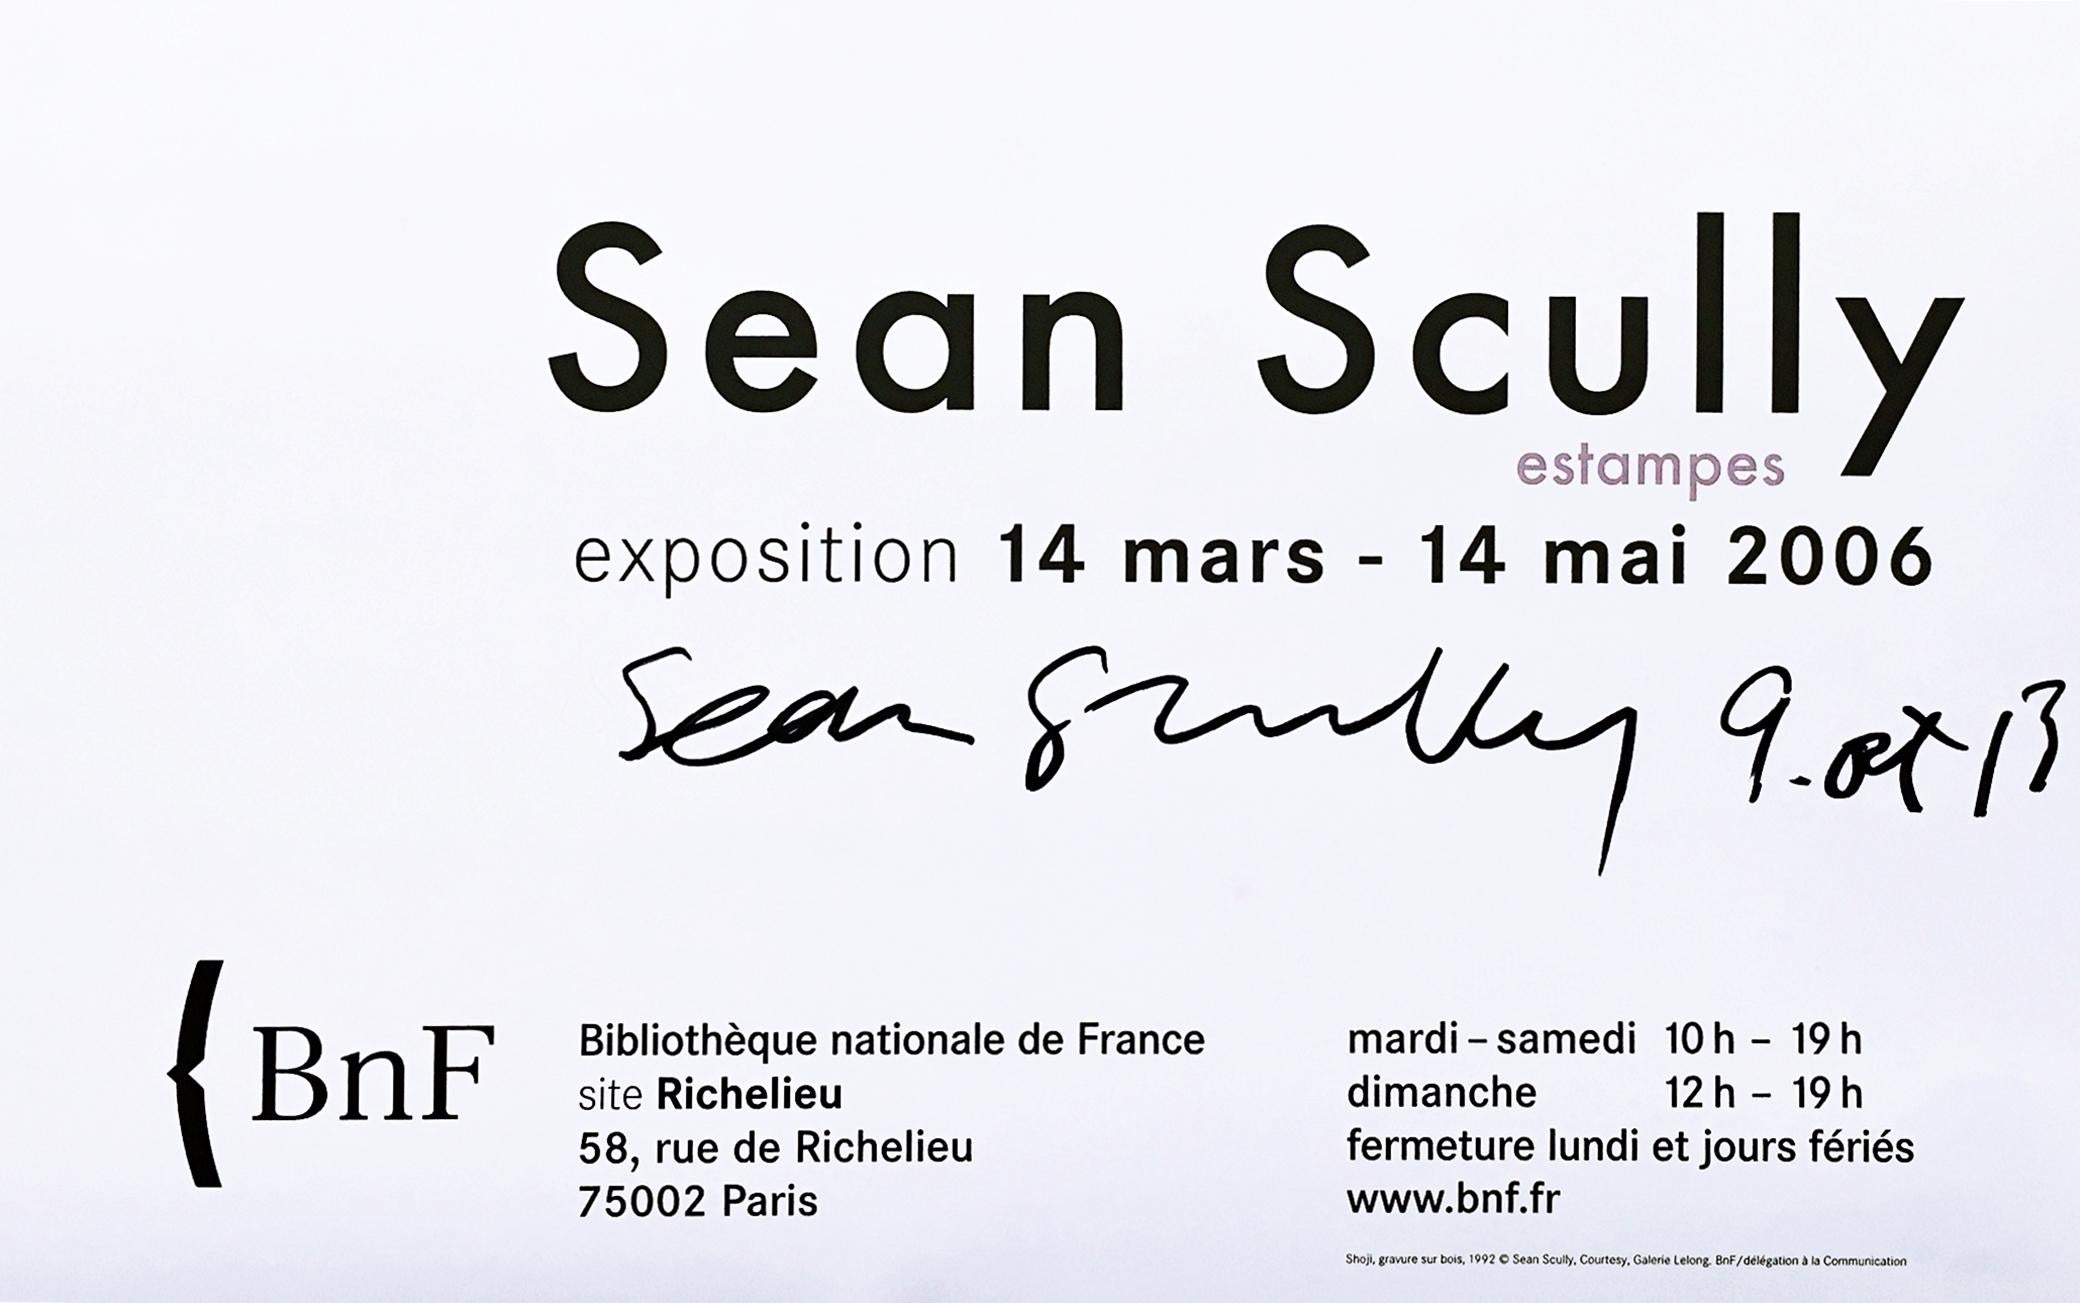 Sean Scully Estampes, France (Hand Signed), 2006
Offset Lithograph poster
Boldly signed in black marker on the front by Sean Scully for the present owner
Unframed
This is a wonderful piece for true Scully fans. It's a rare 2006 poster from the